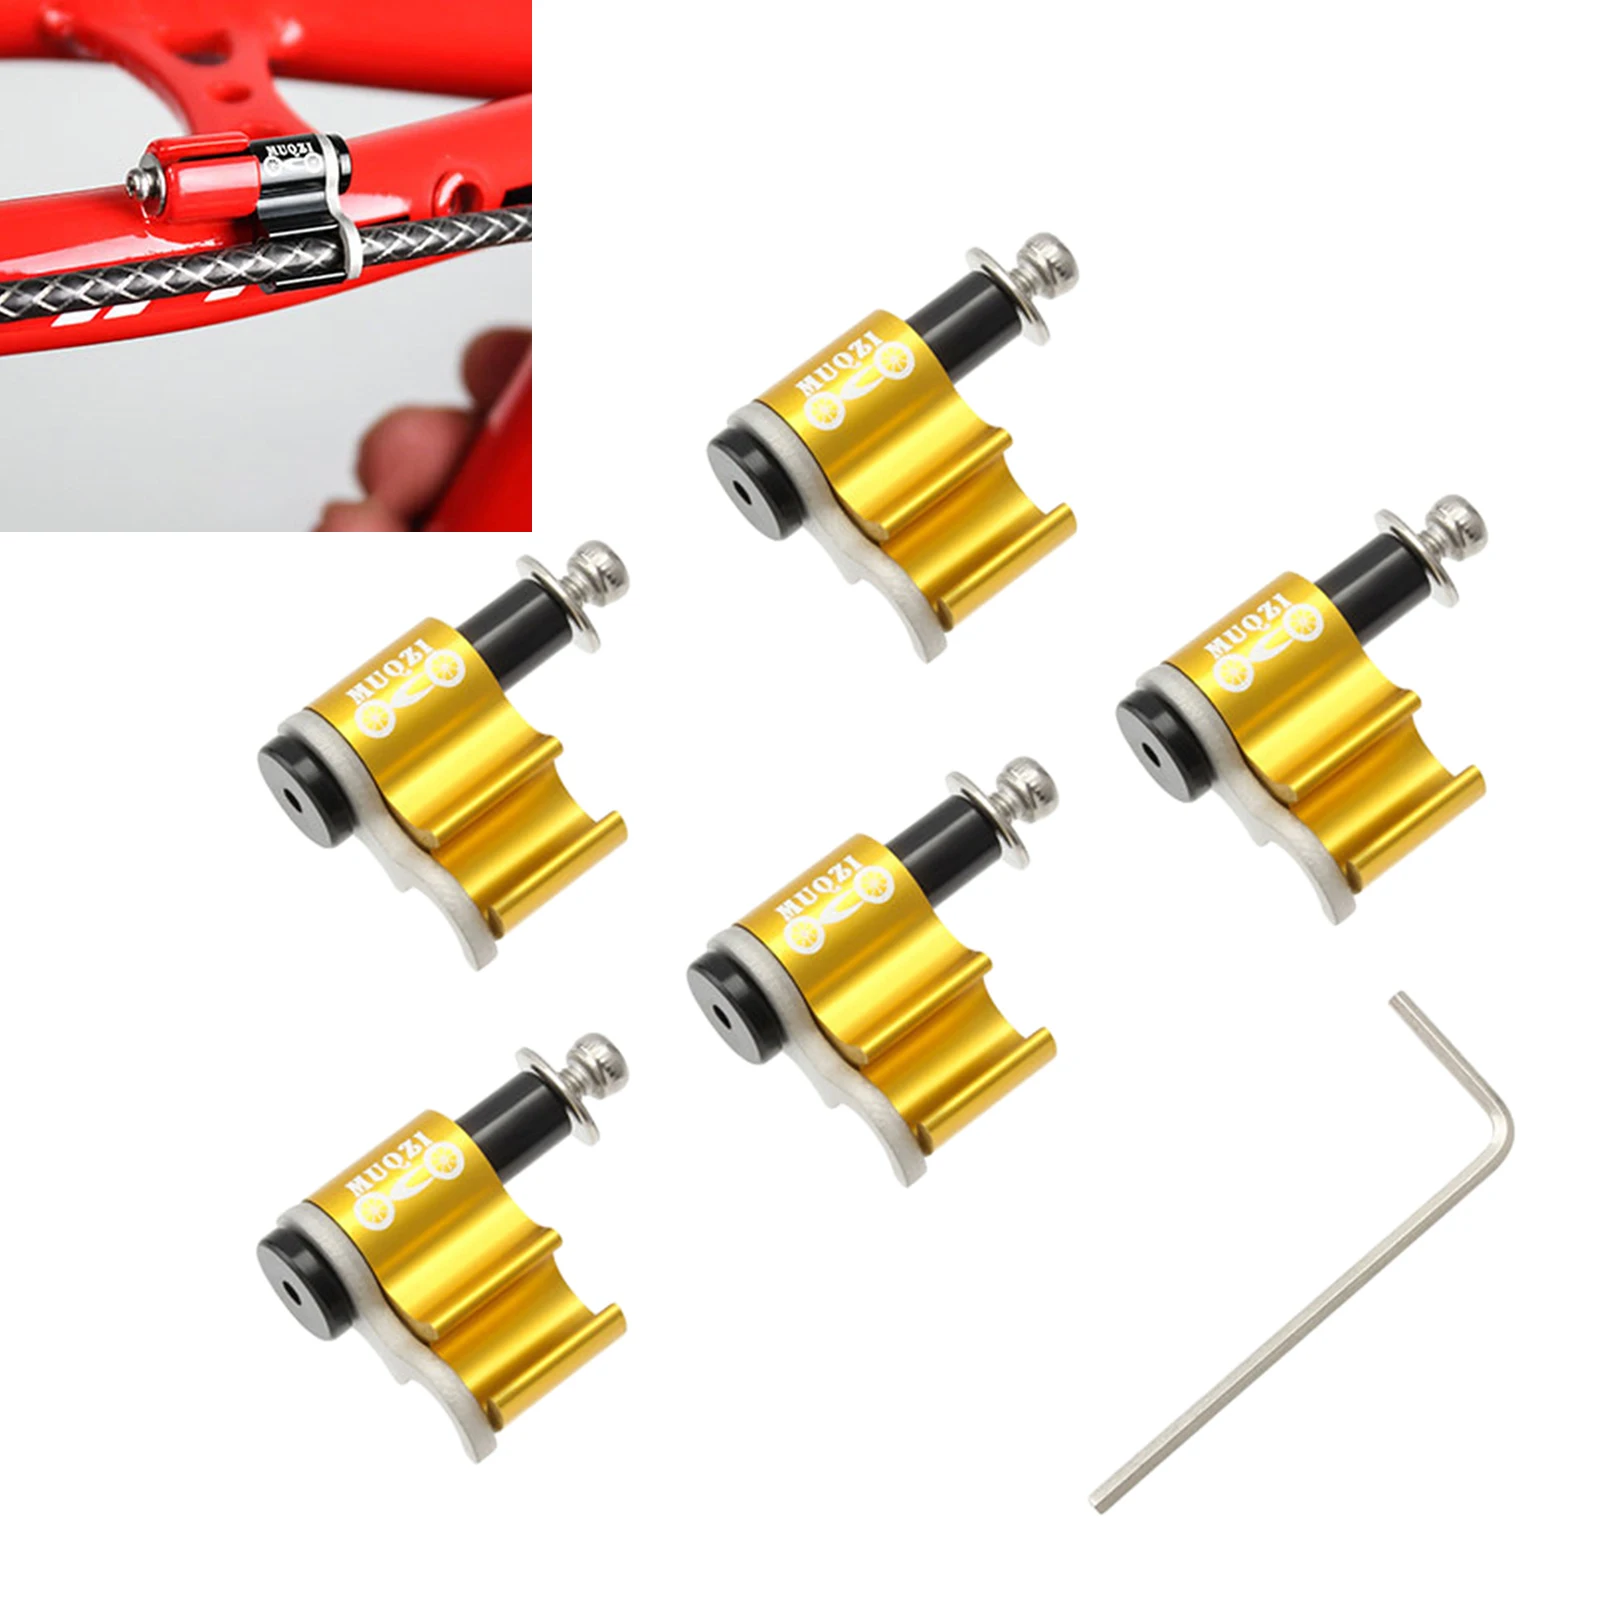 5pcs Aluminum Alloy Bike Cable Clips Brake Cable Housing Clip Bicycle Cable Hose Guide Clamps for Brake Derailleur Cables